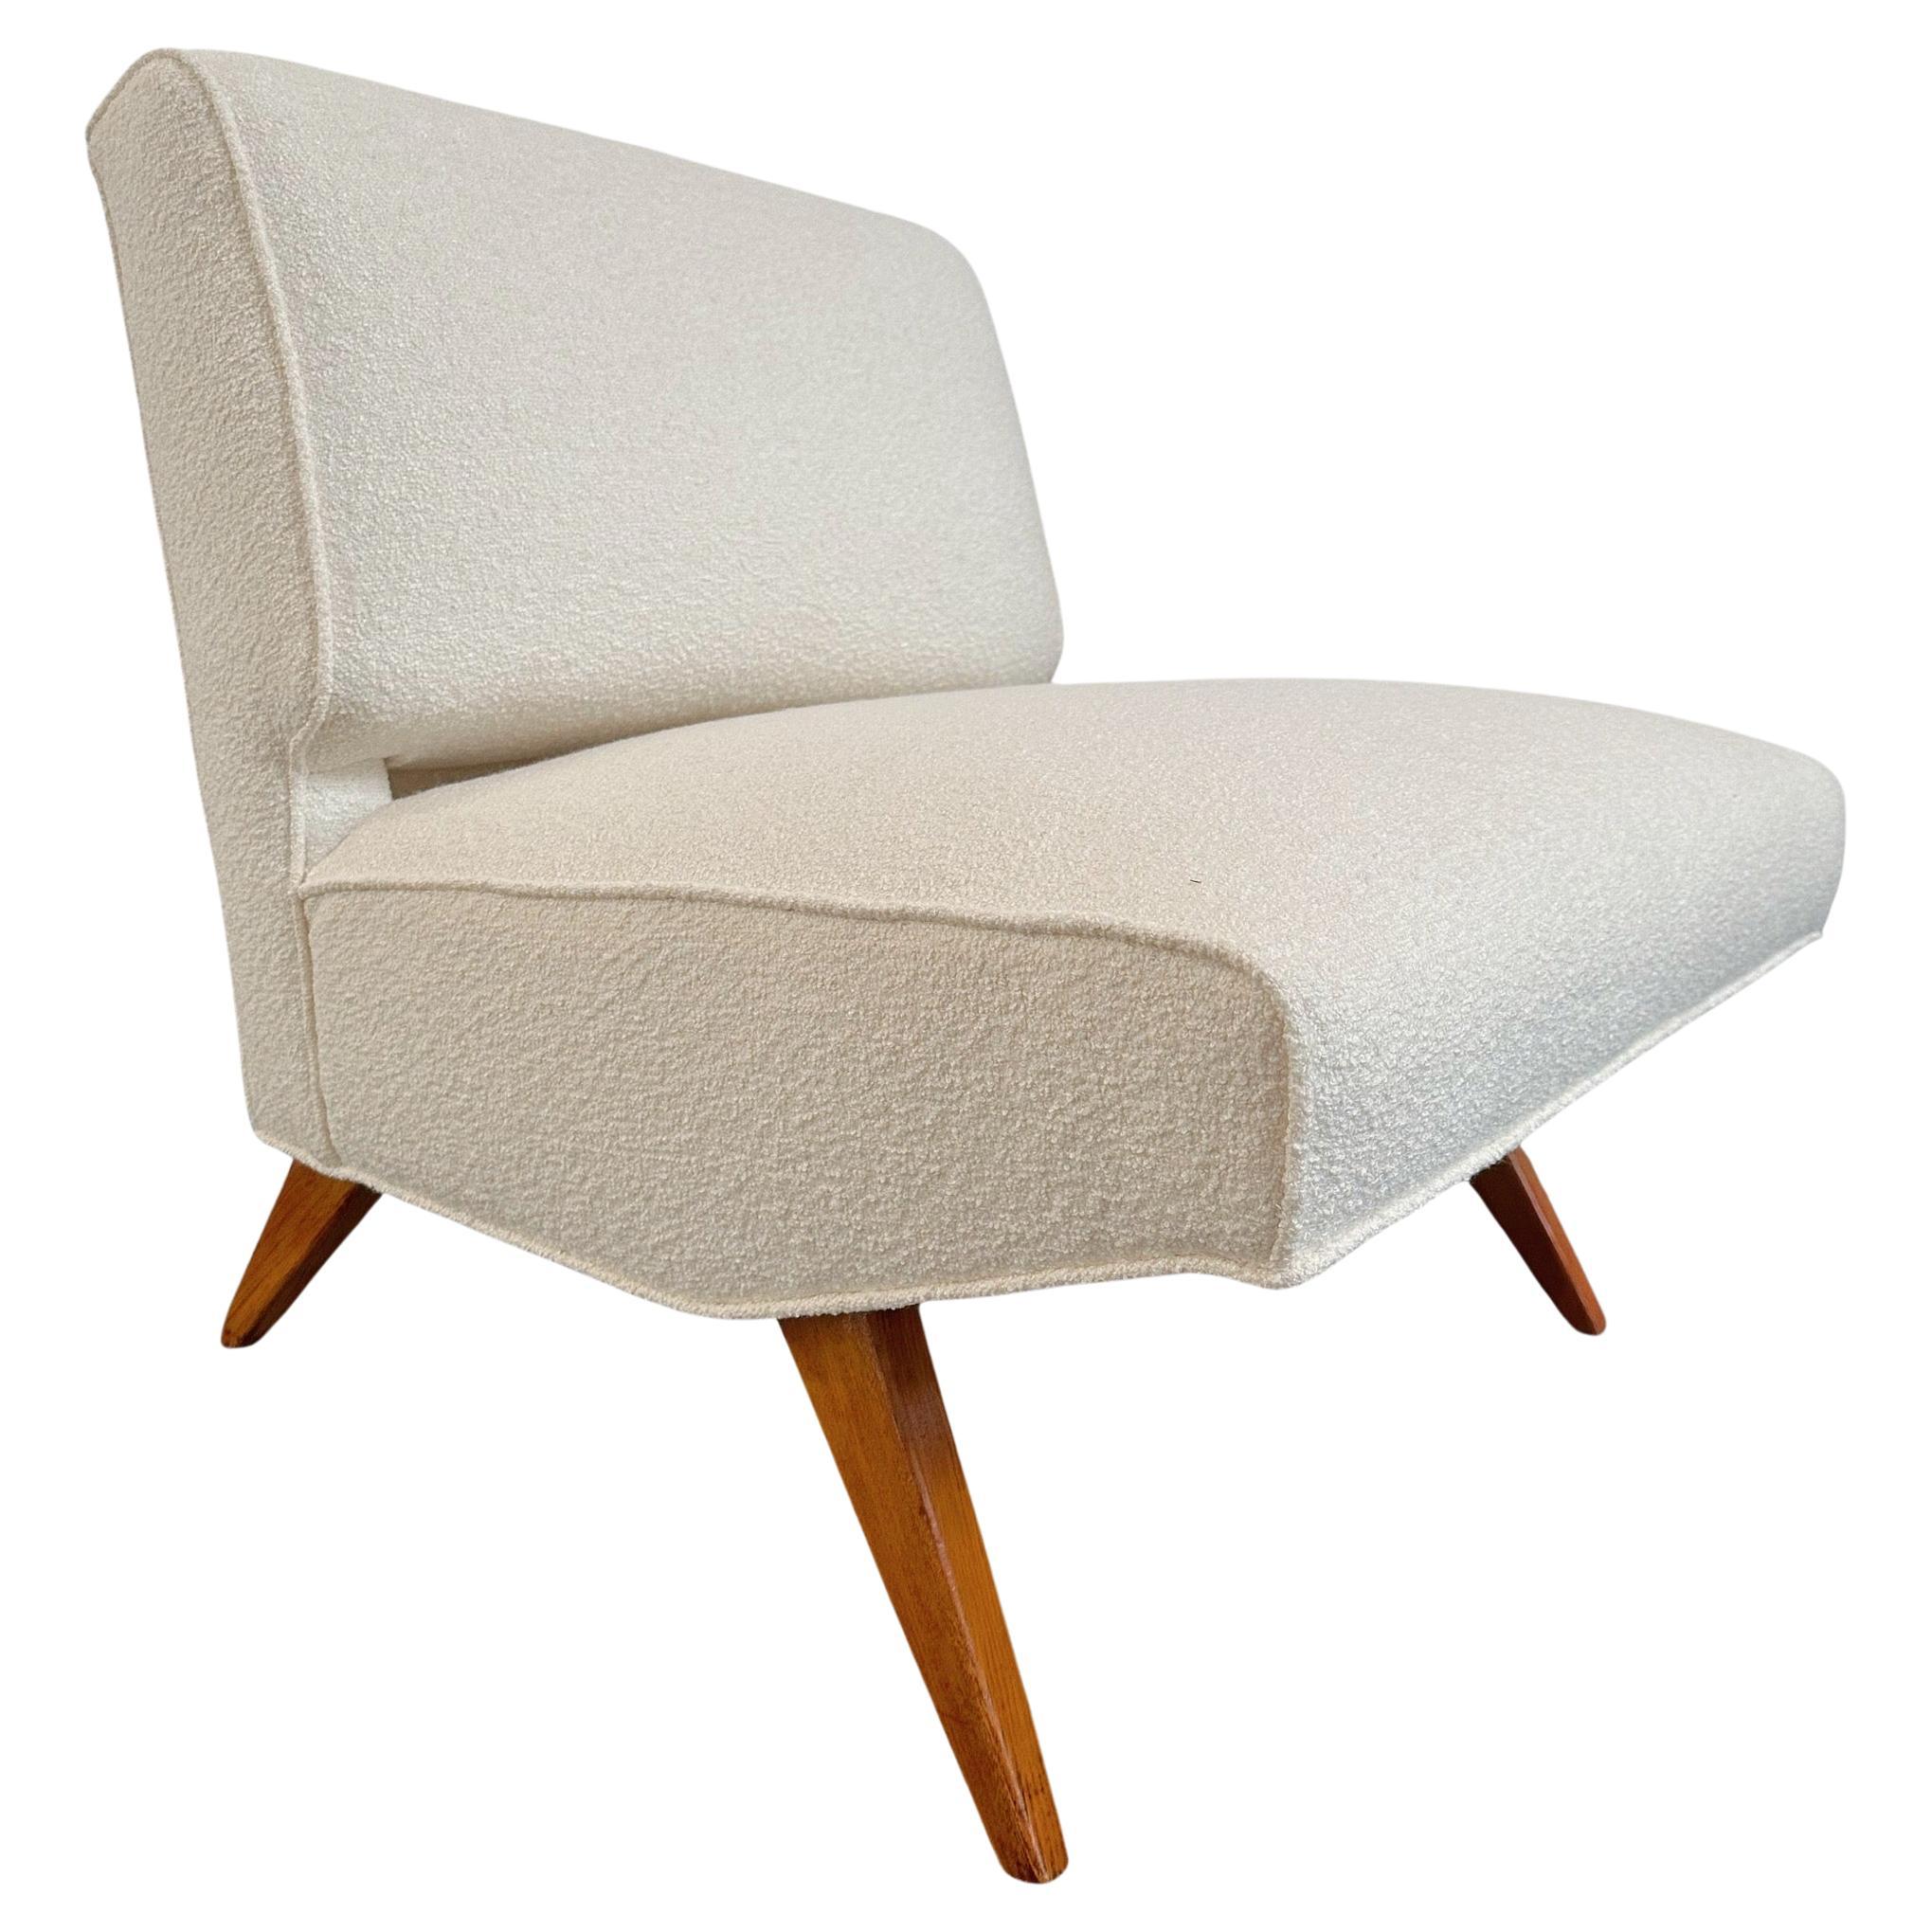 Paul McCobb Directional Lounge Chair For Sale